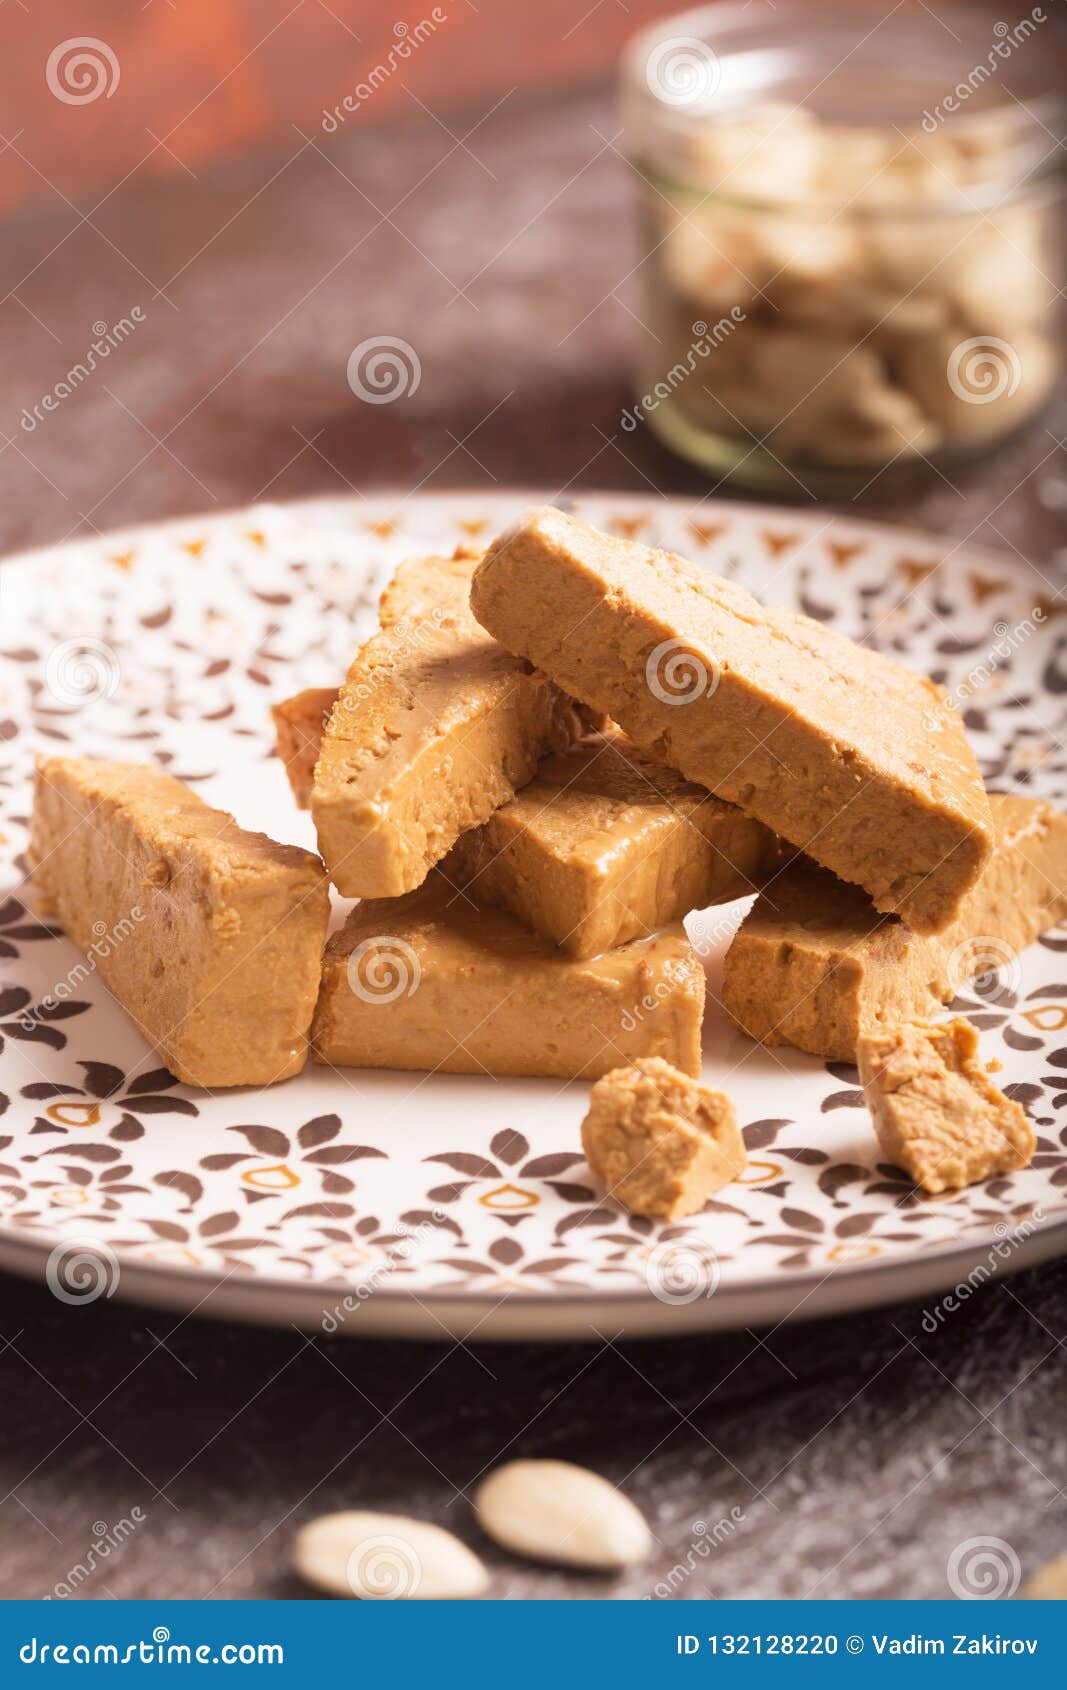 Plate of Turron, Typical Christmas Food in Spain Stock Photo - Image of ...